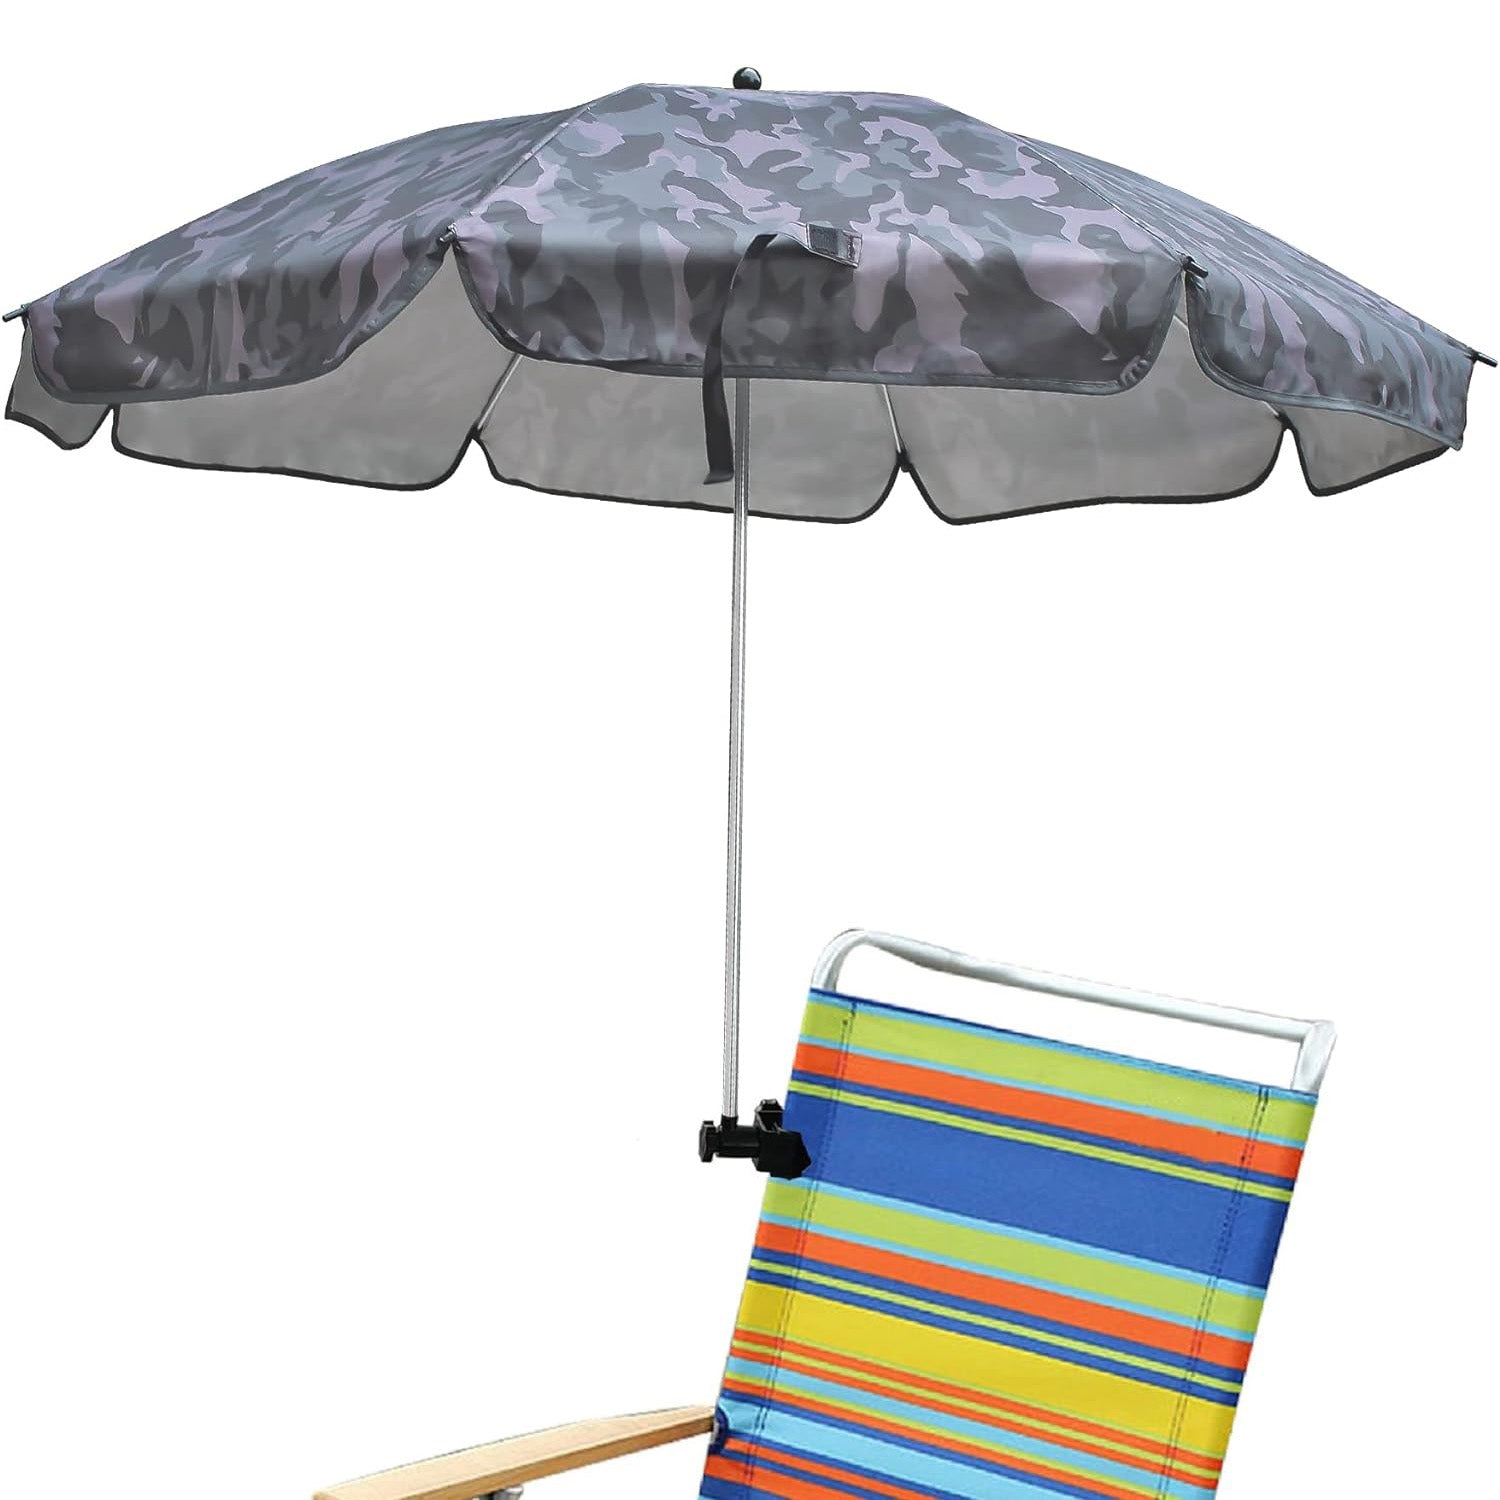 AMMSUN 43 inches Chair Umbrella with Universal Clamp Camouflage